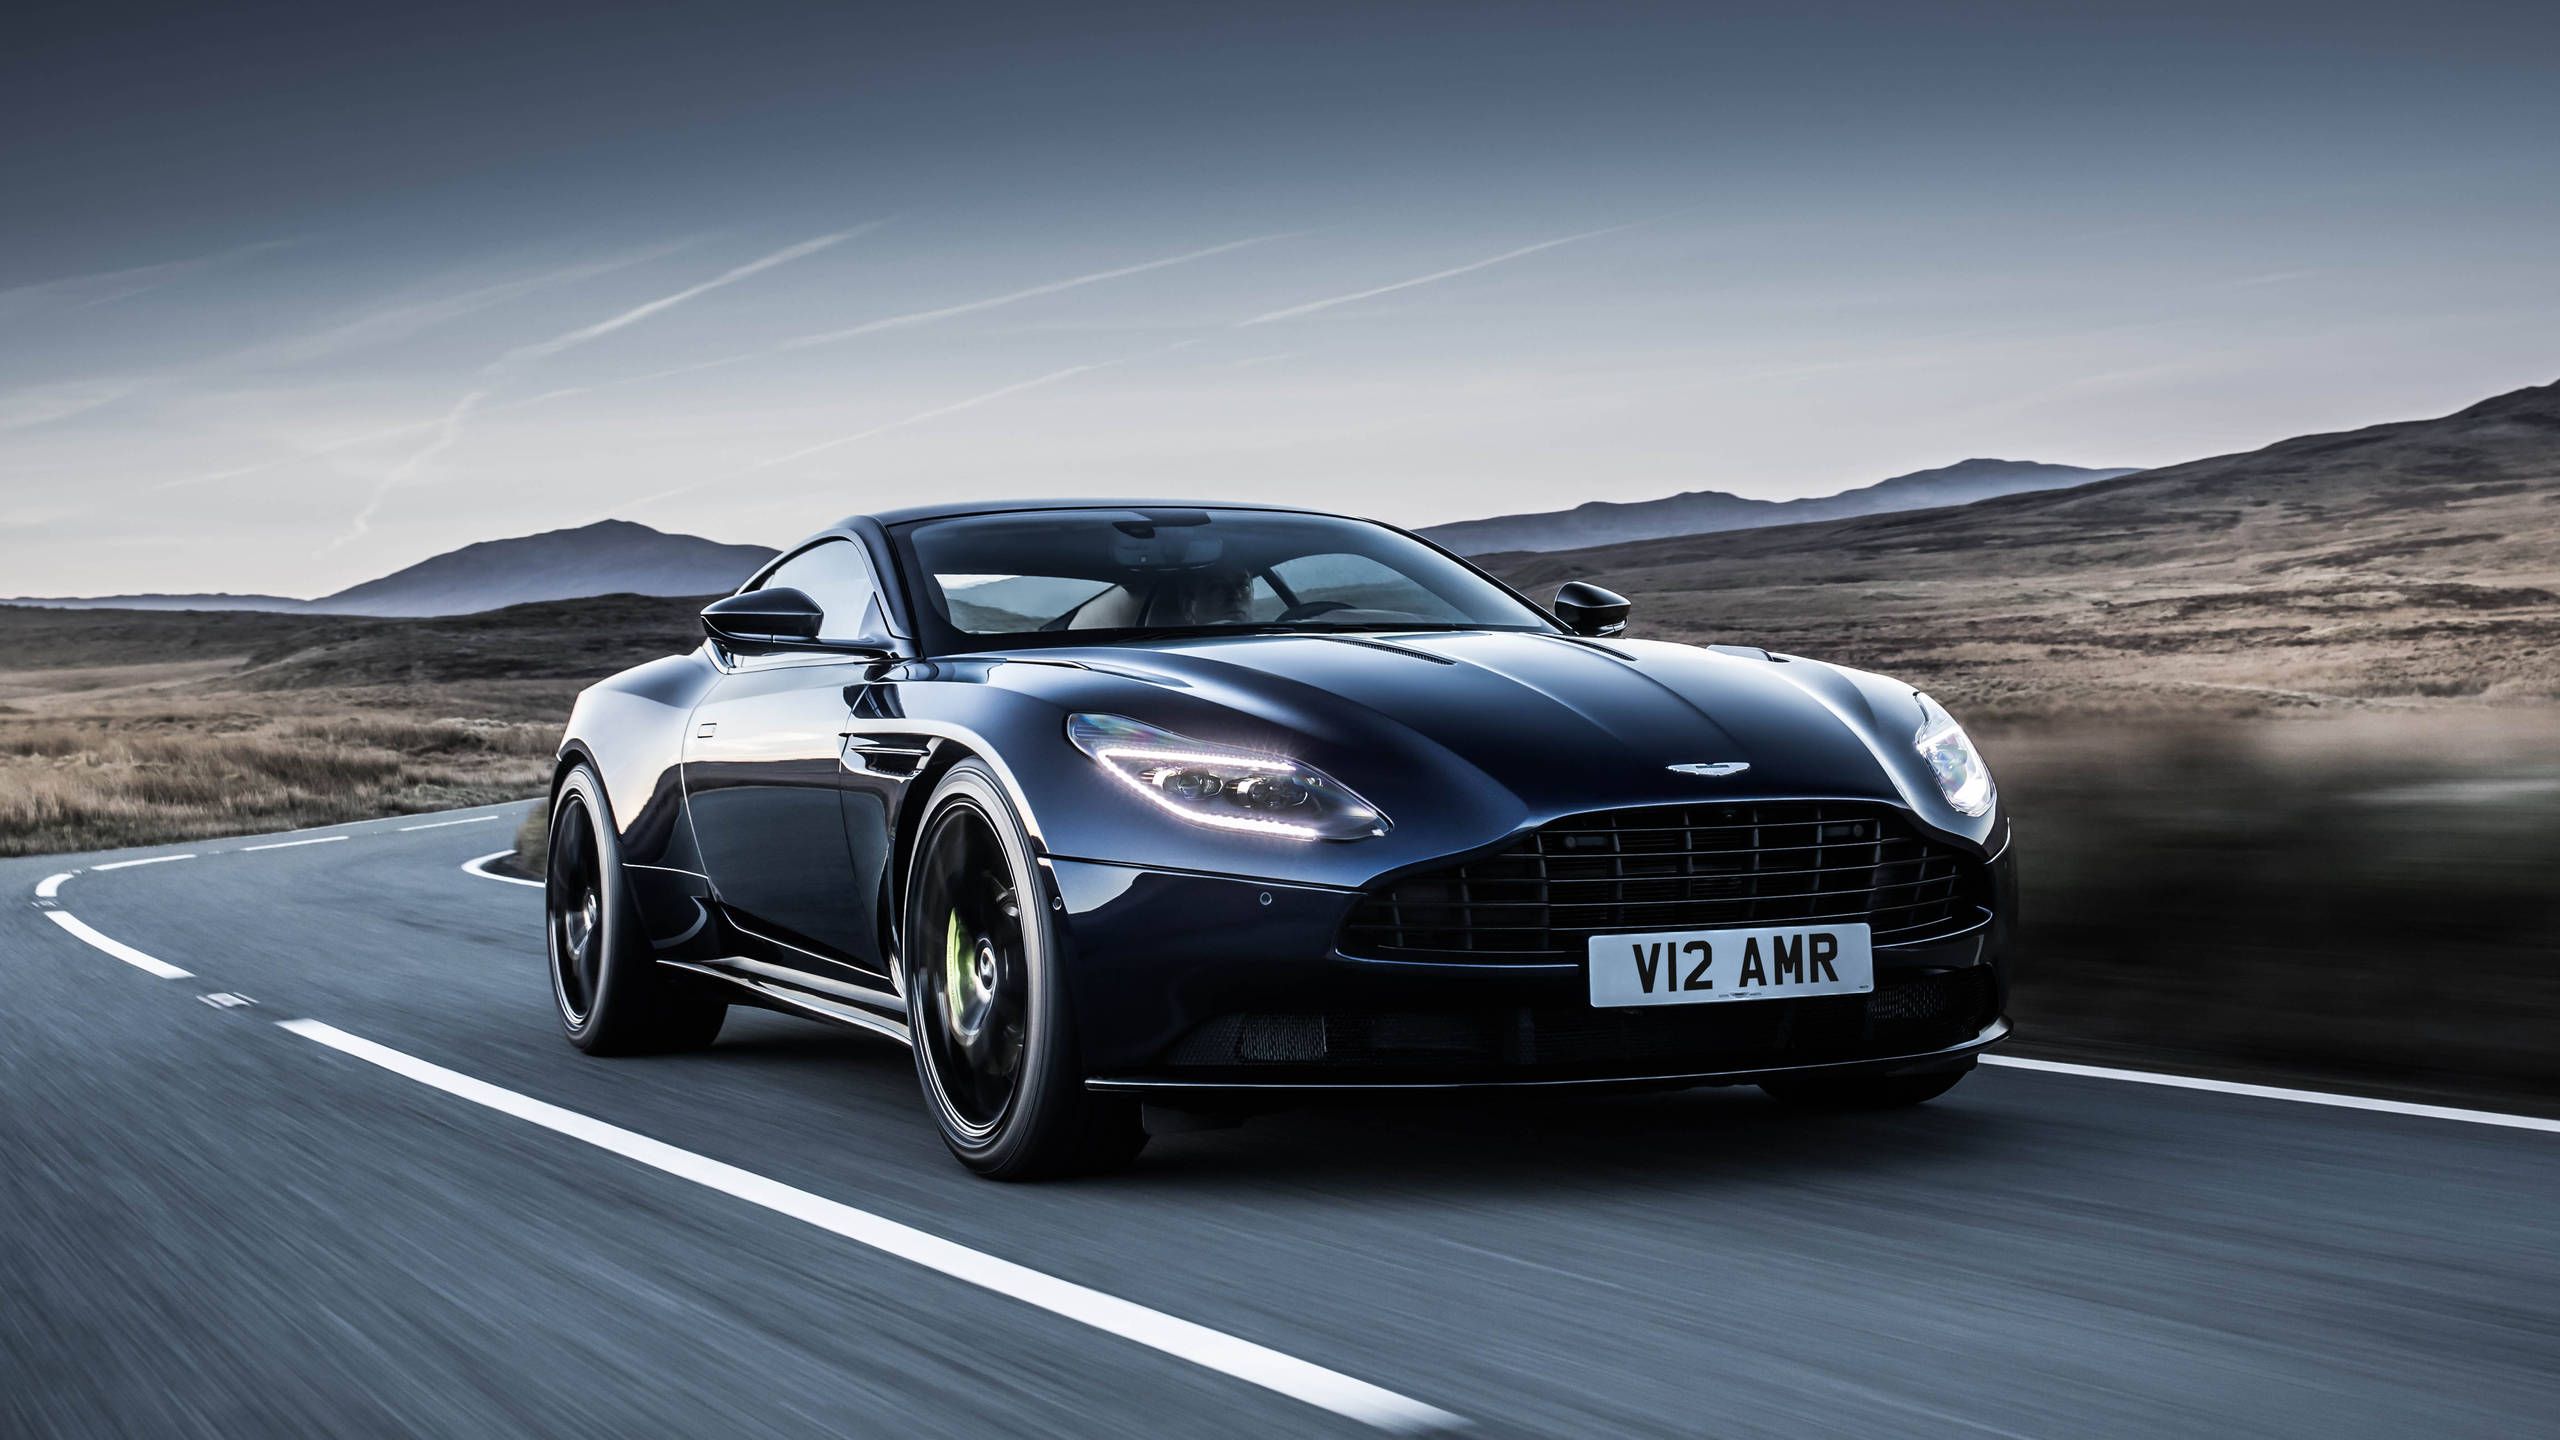 The Aston Martin Db11 Amr Is Your Grand Touring Supercar